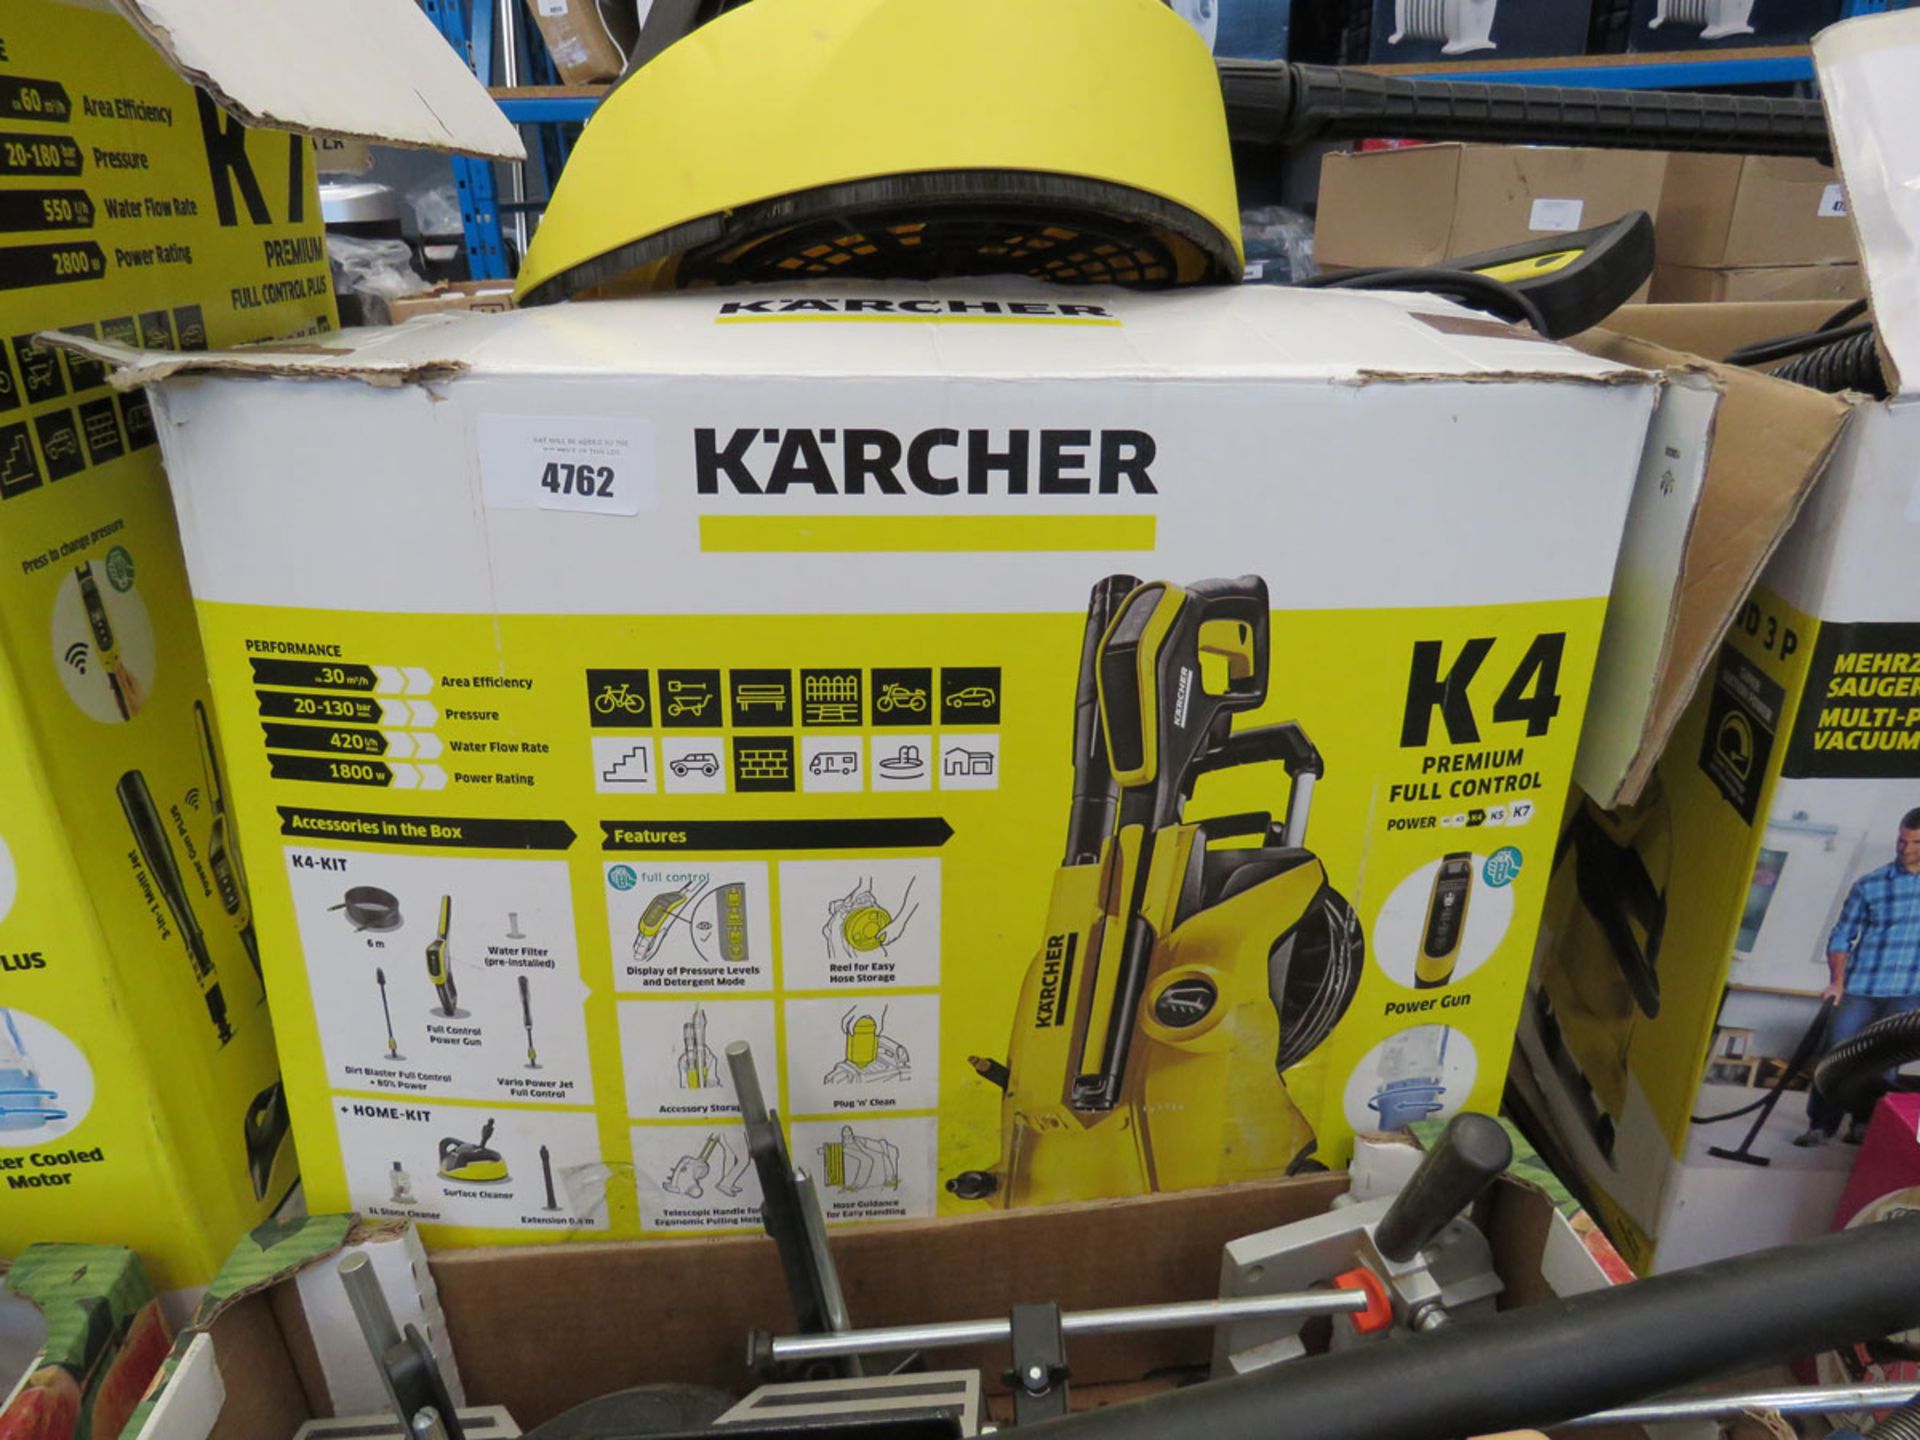 Karcher K4 Premium full control electric pressure washer, with patio cleaning head